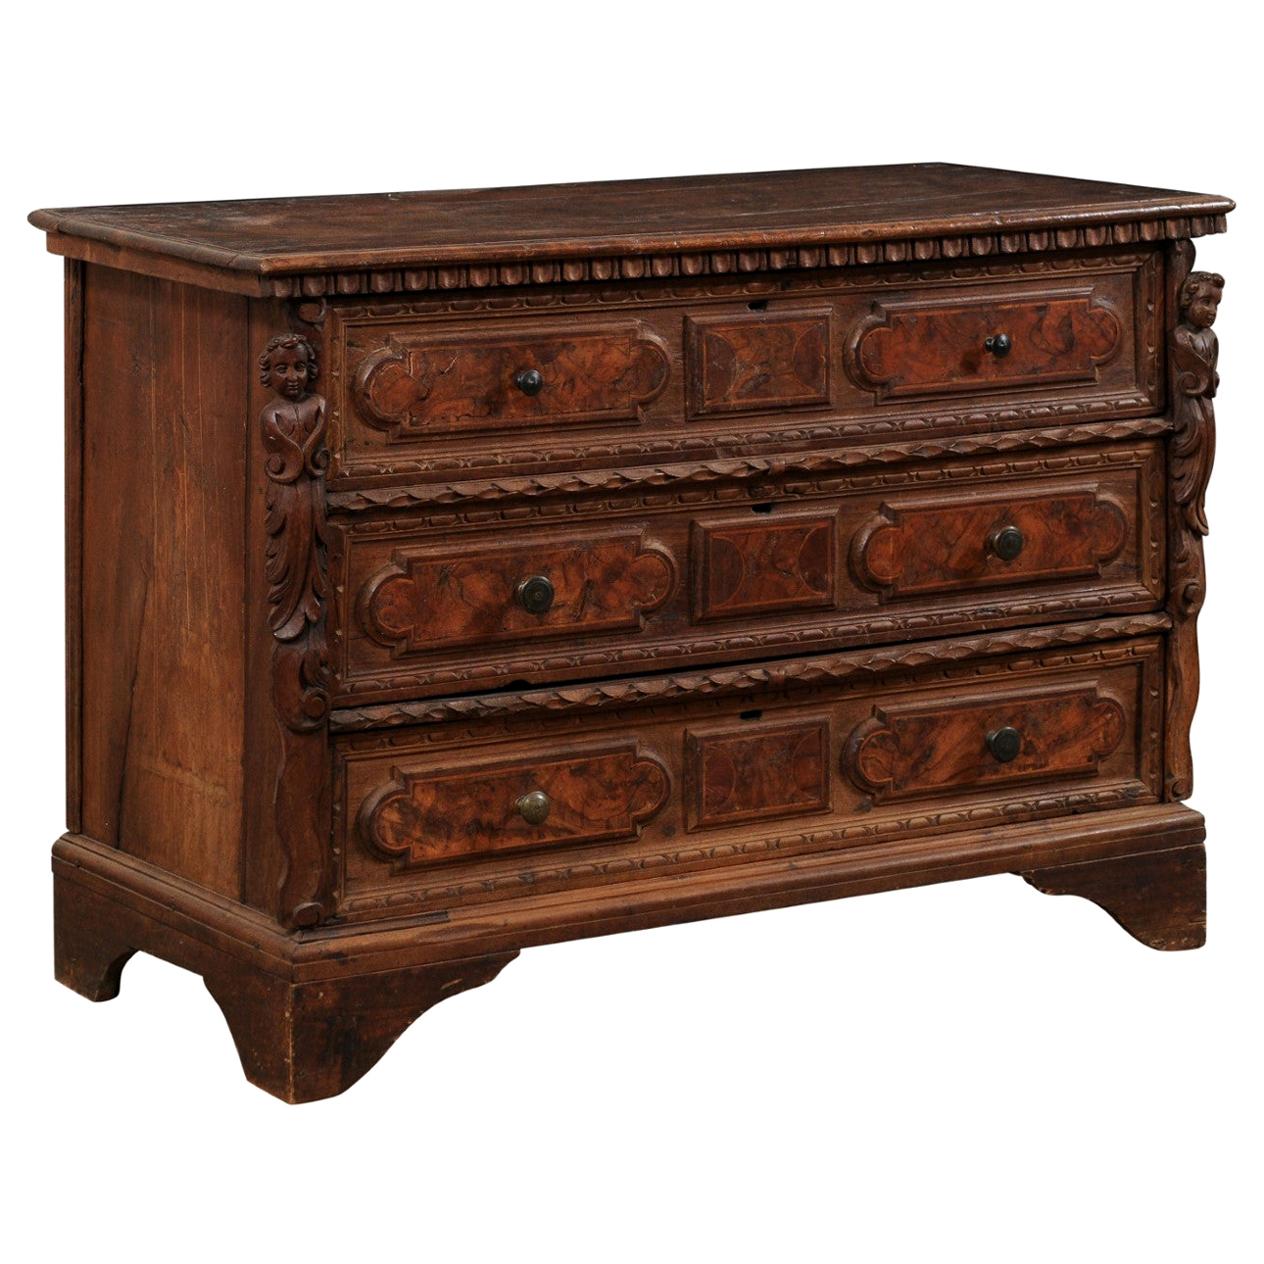 18th C Italian Chest Adorn with Putti, Egg-n-Dart, and Acanthus Carvings For Sale